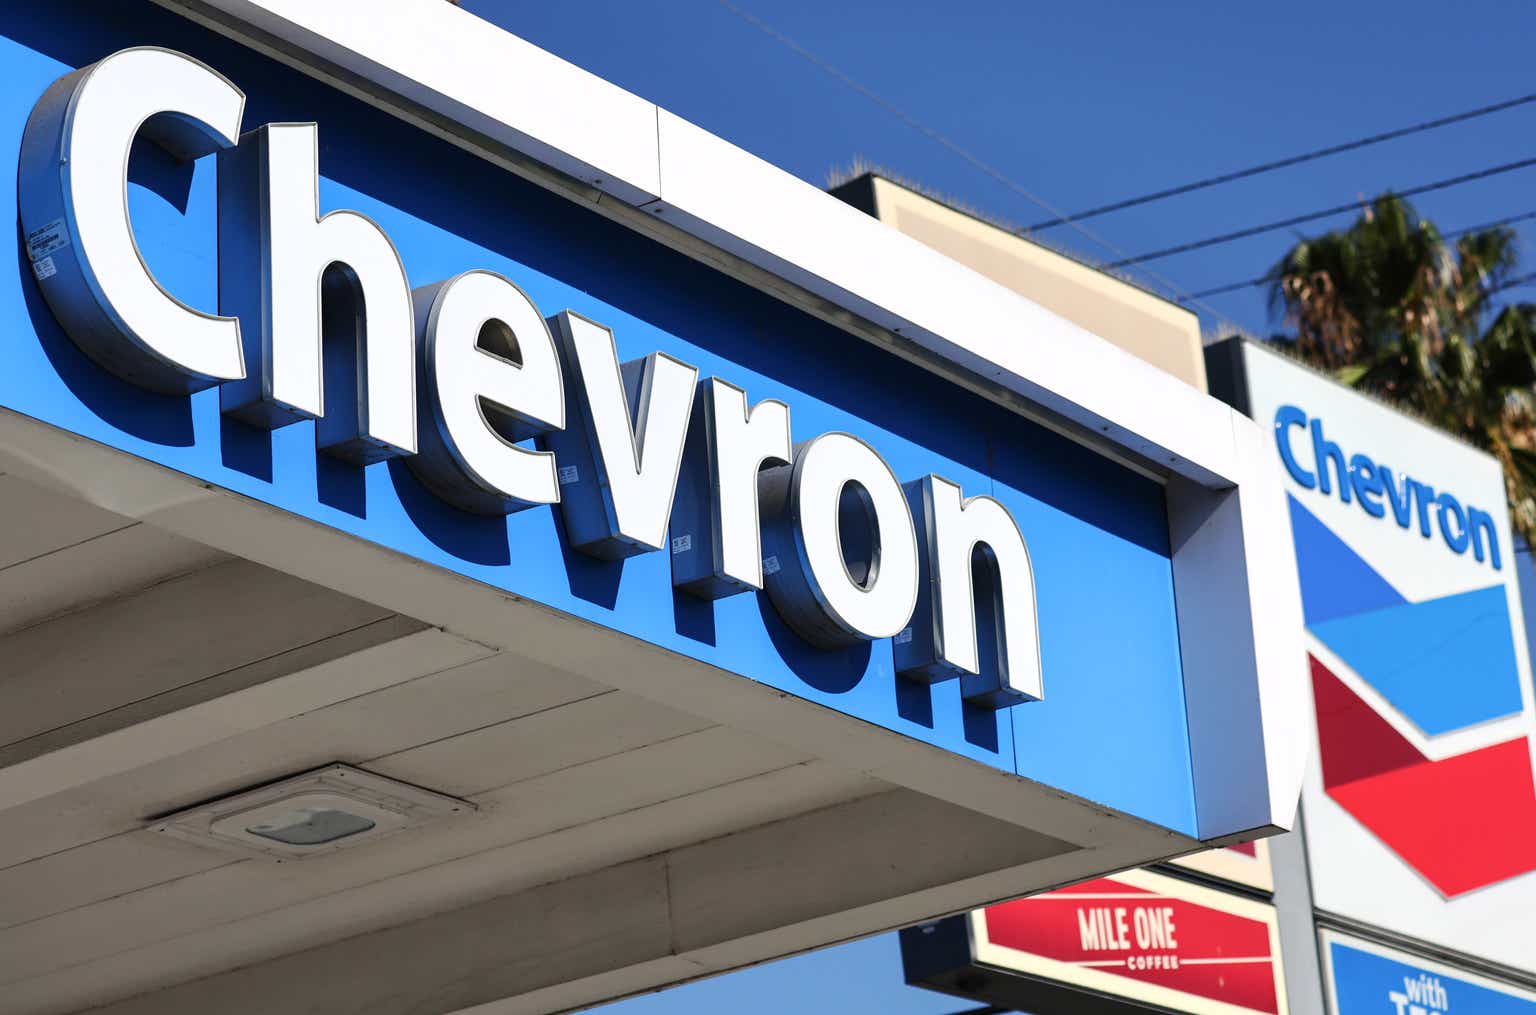 PDC Energy: $7.6 Billion Acquisition By Chevron Appears To Be At A Fair Price